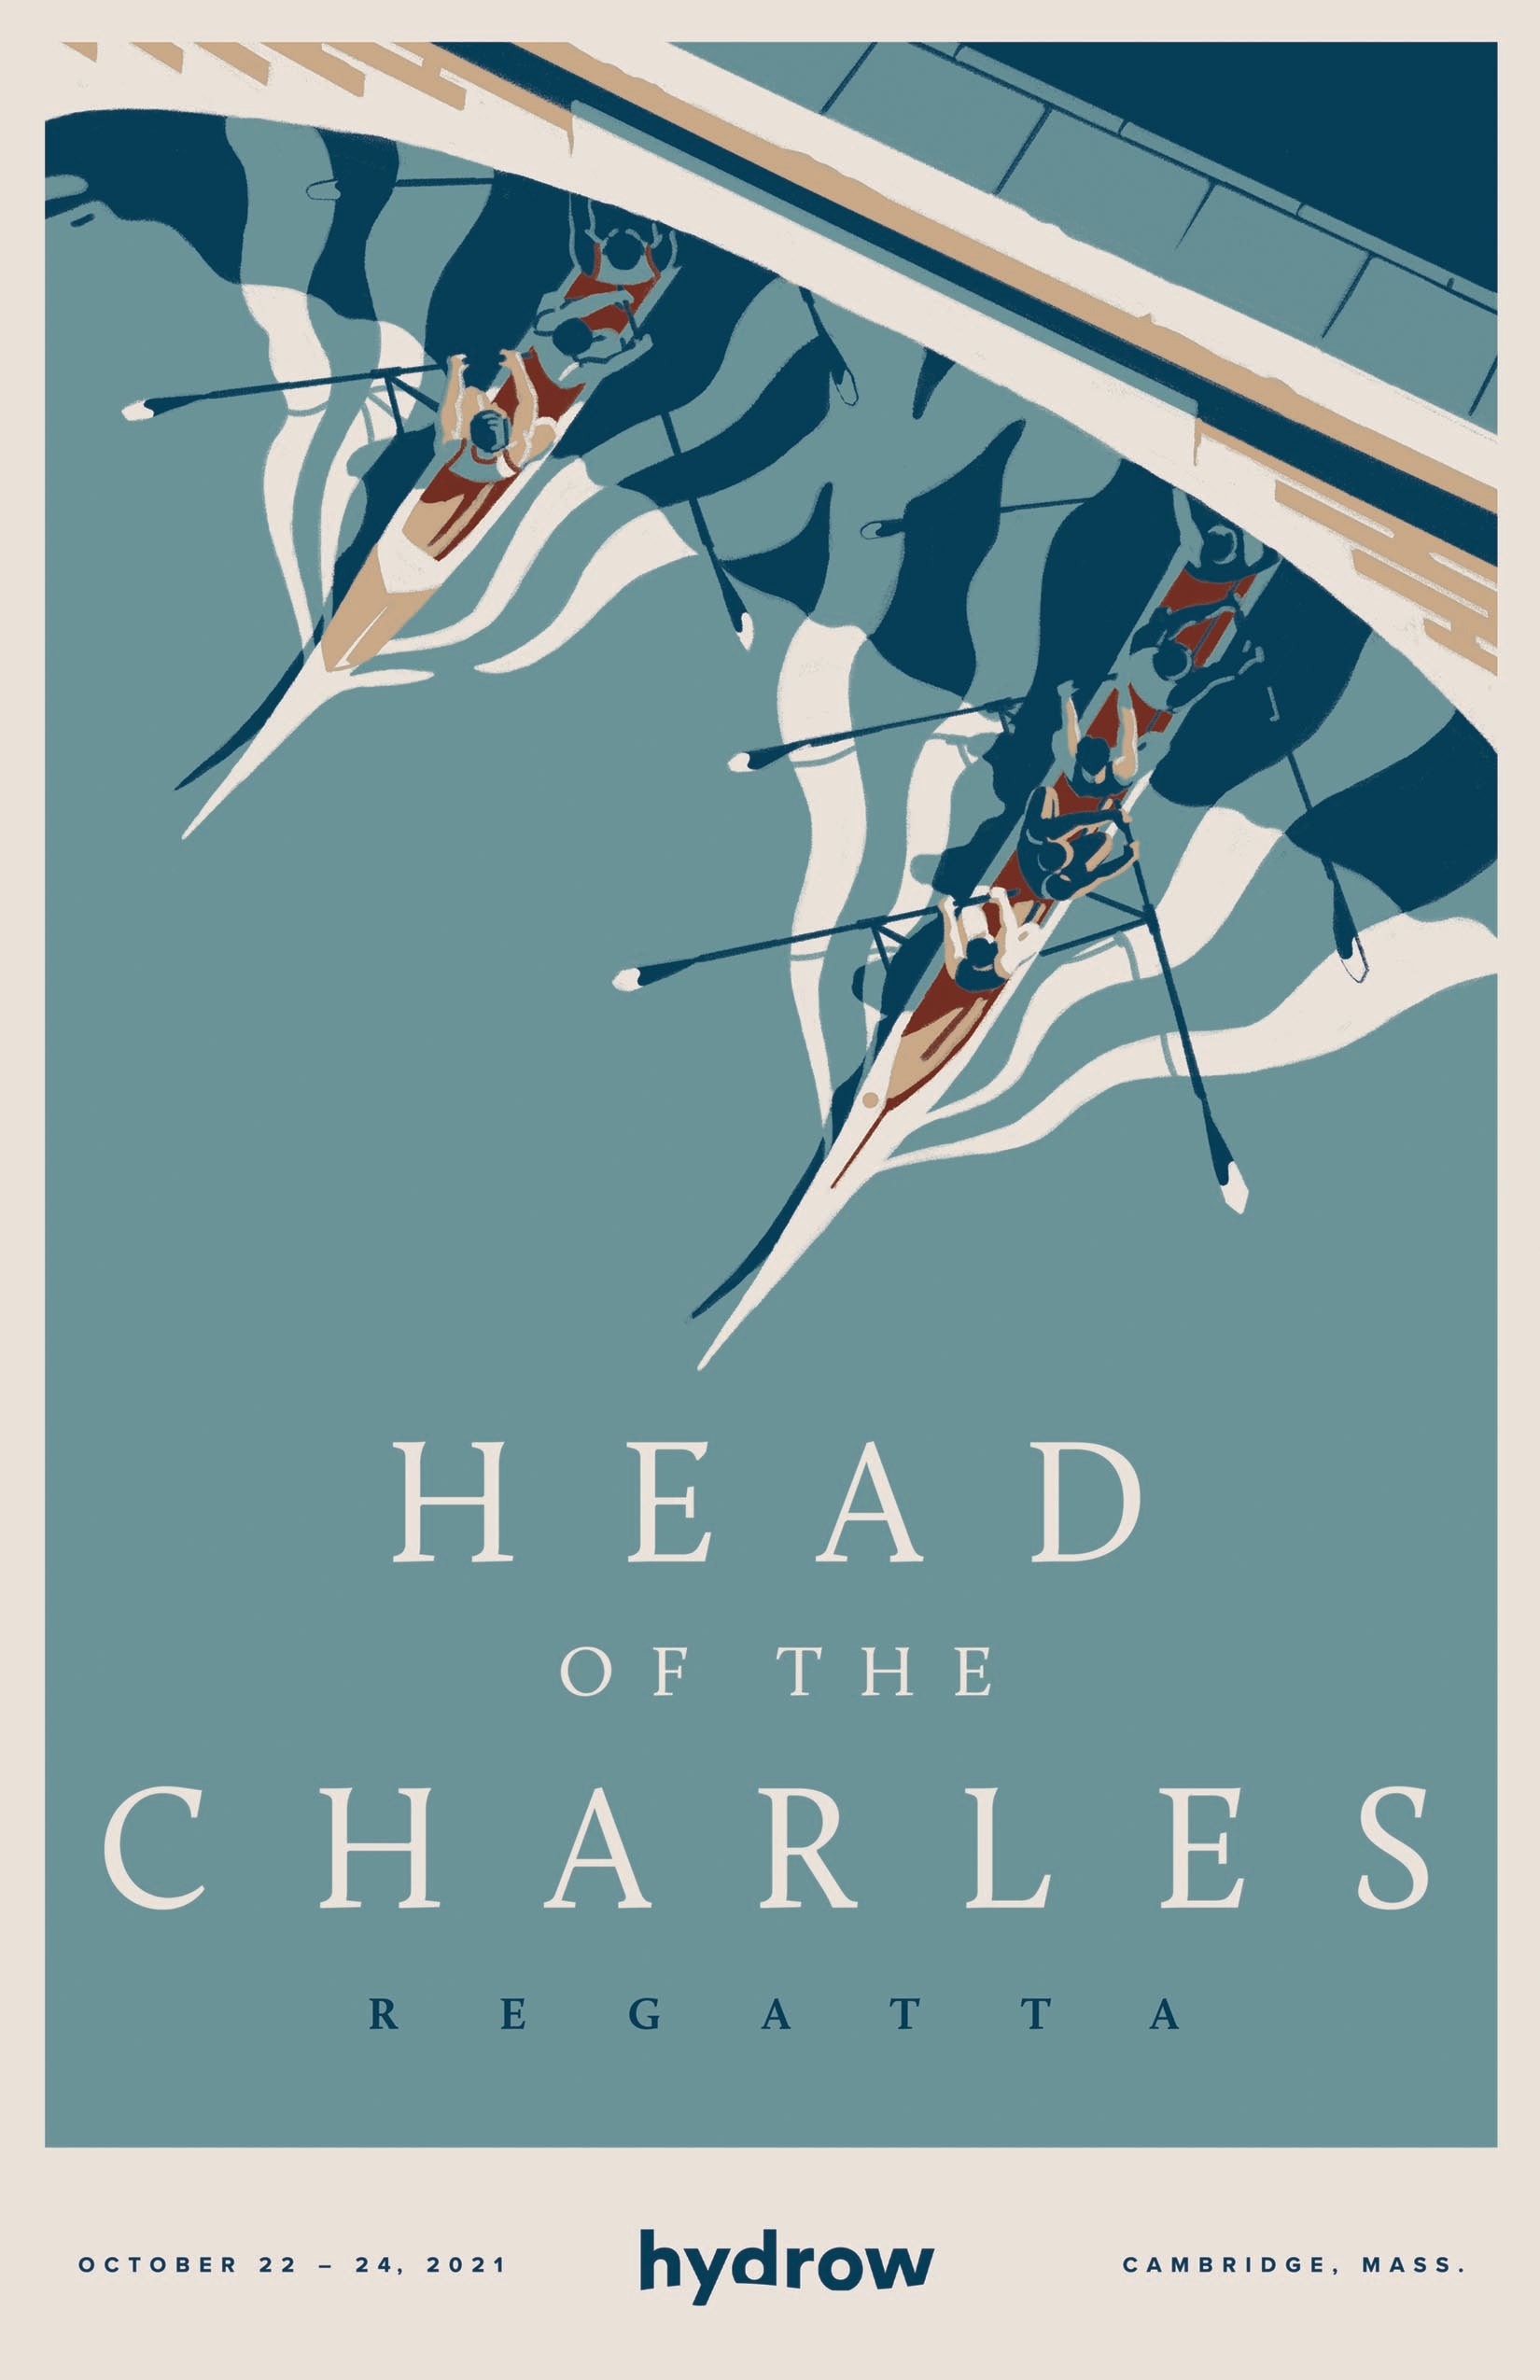 poster of graphic of 2 row boats rowing under bridge with text "HEAD OF THE CHARLES REGATTA OCTOBER 22 - 24, 2021 hydrow CAMBRIDGE, MASS."